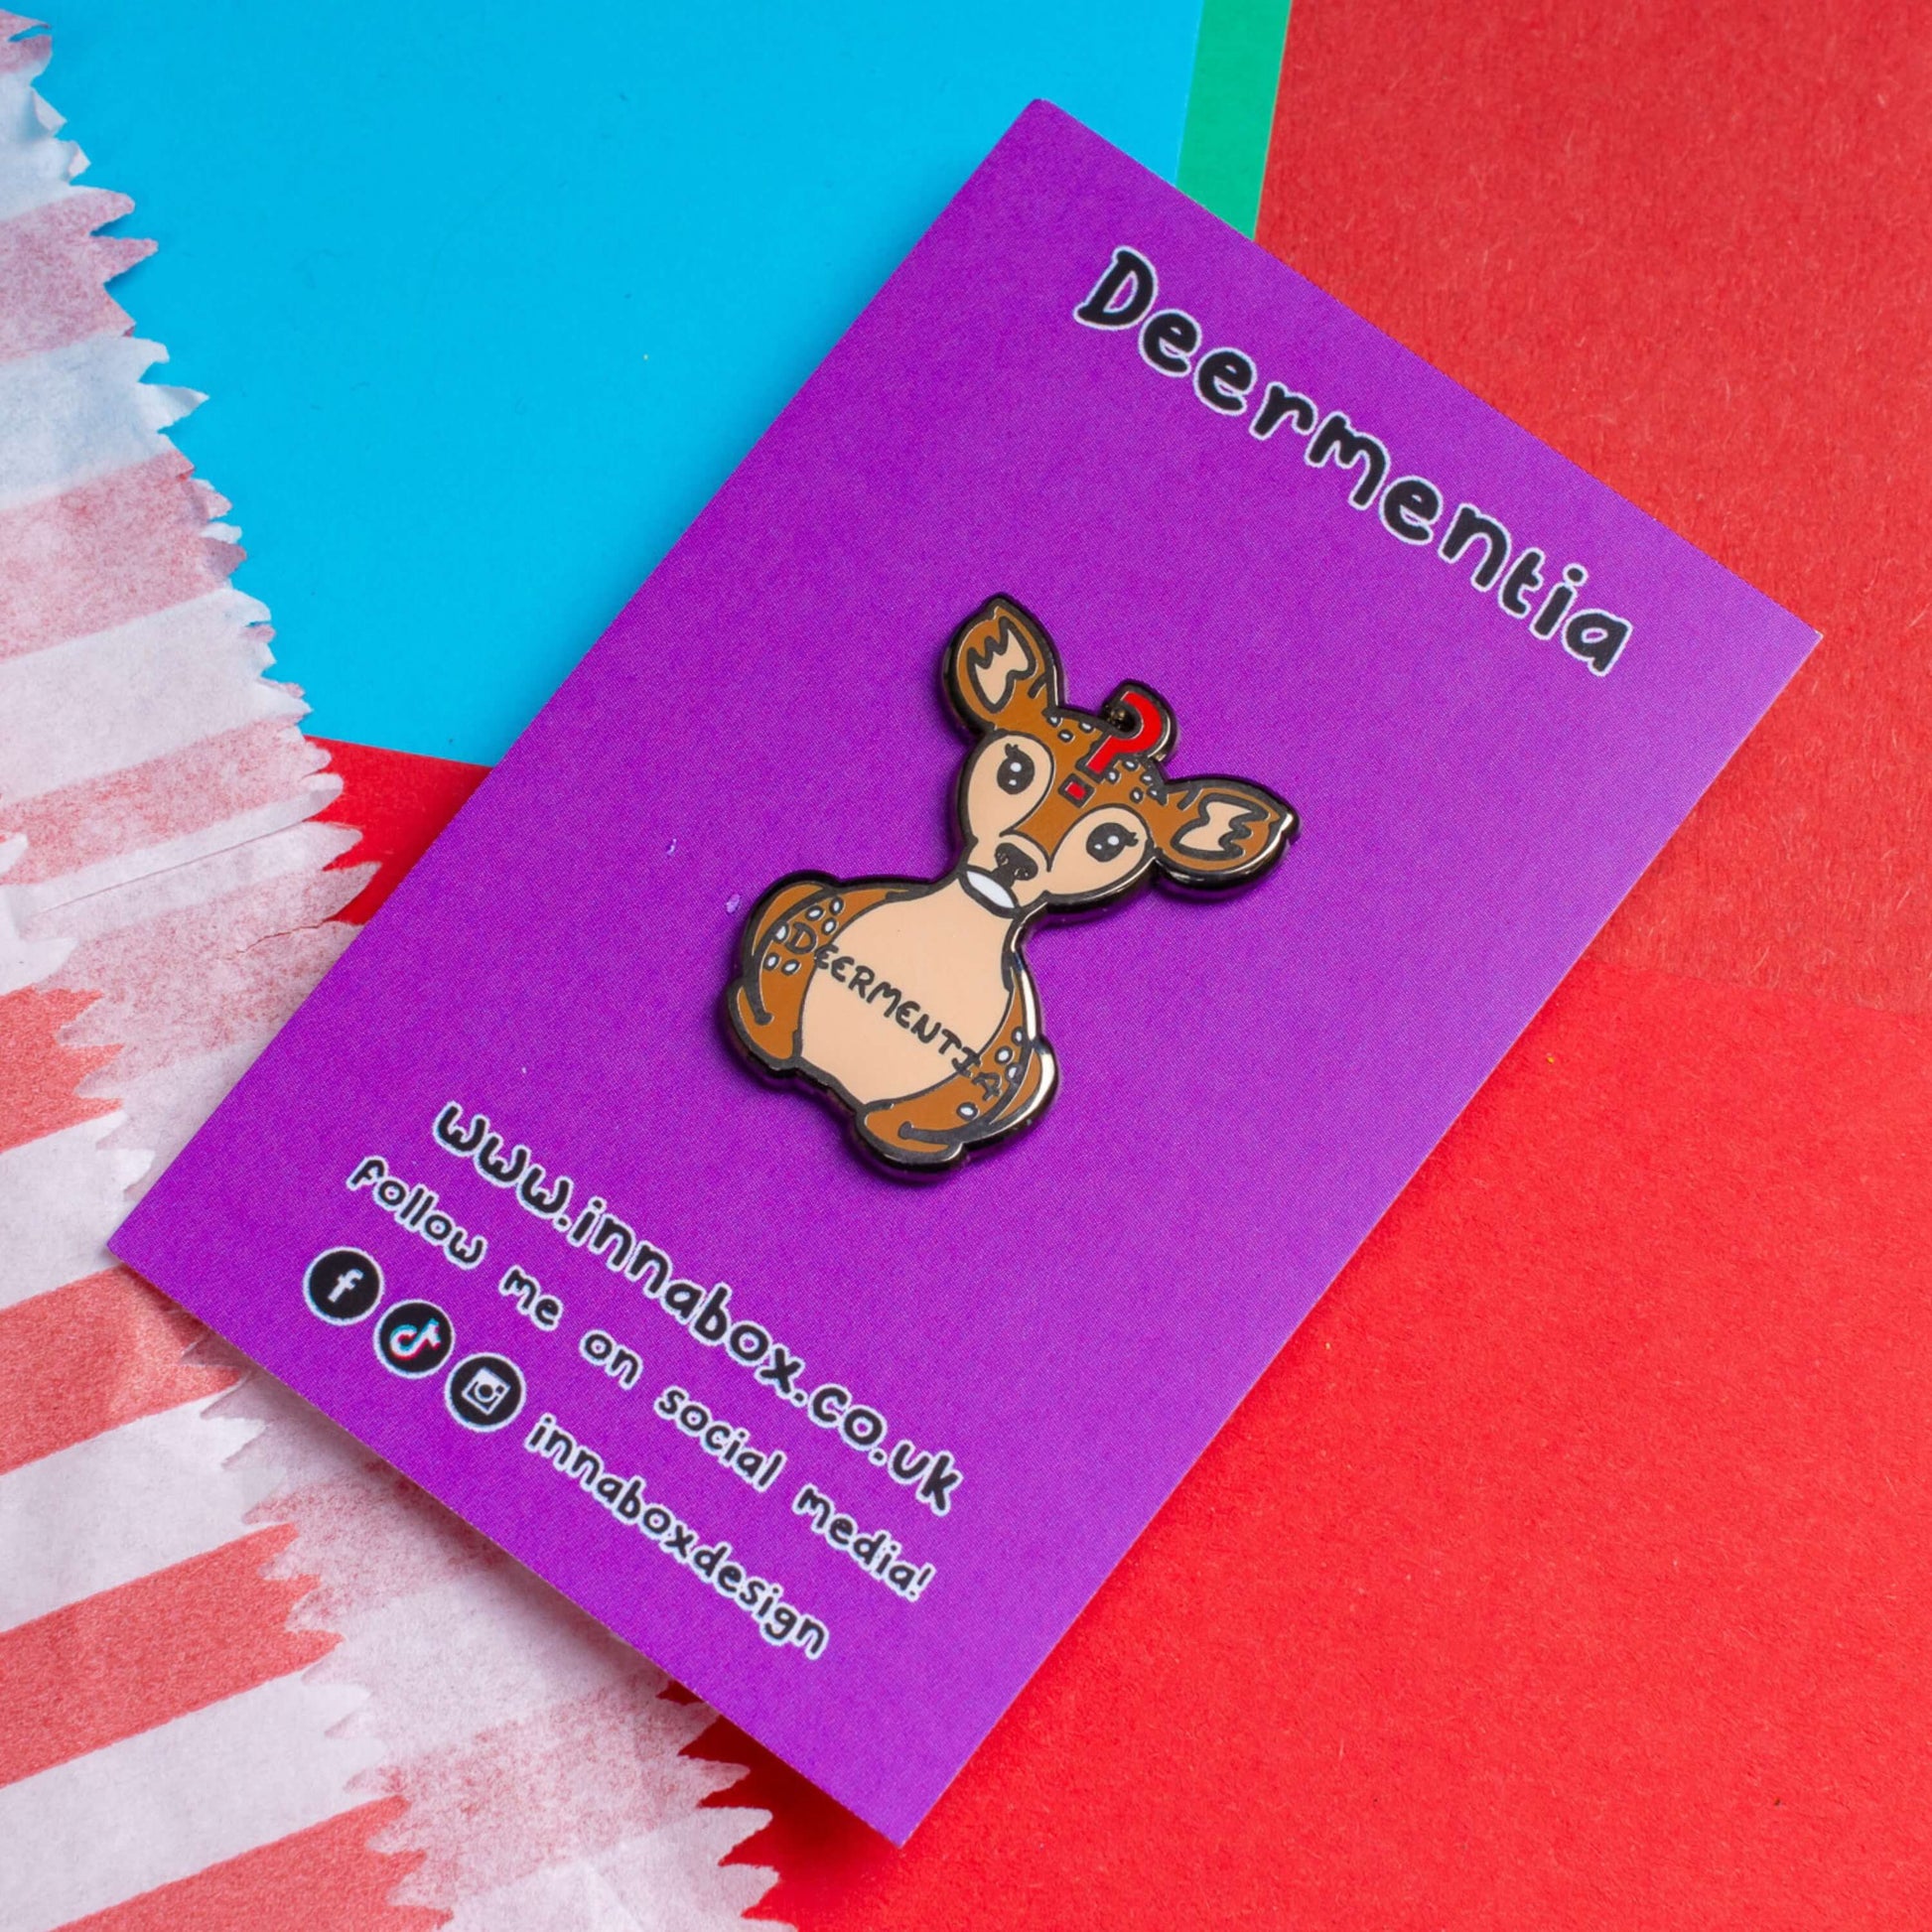 The Deermentia Deer Enamel Pin - Dementia on purple backing card laid on a red, blue and green card background. A brown female deer laying down with a vacant expression and red question mark above its head with 'deermentia' written across its middle. The hand drawn design is raising awareness for dementia.